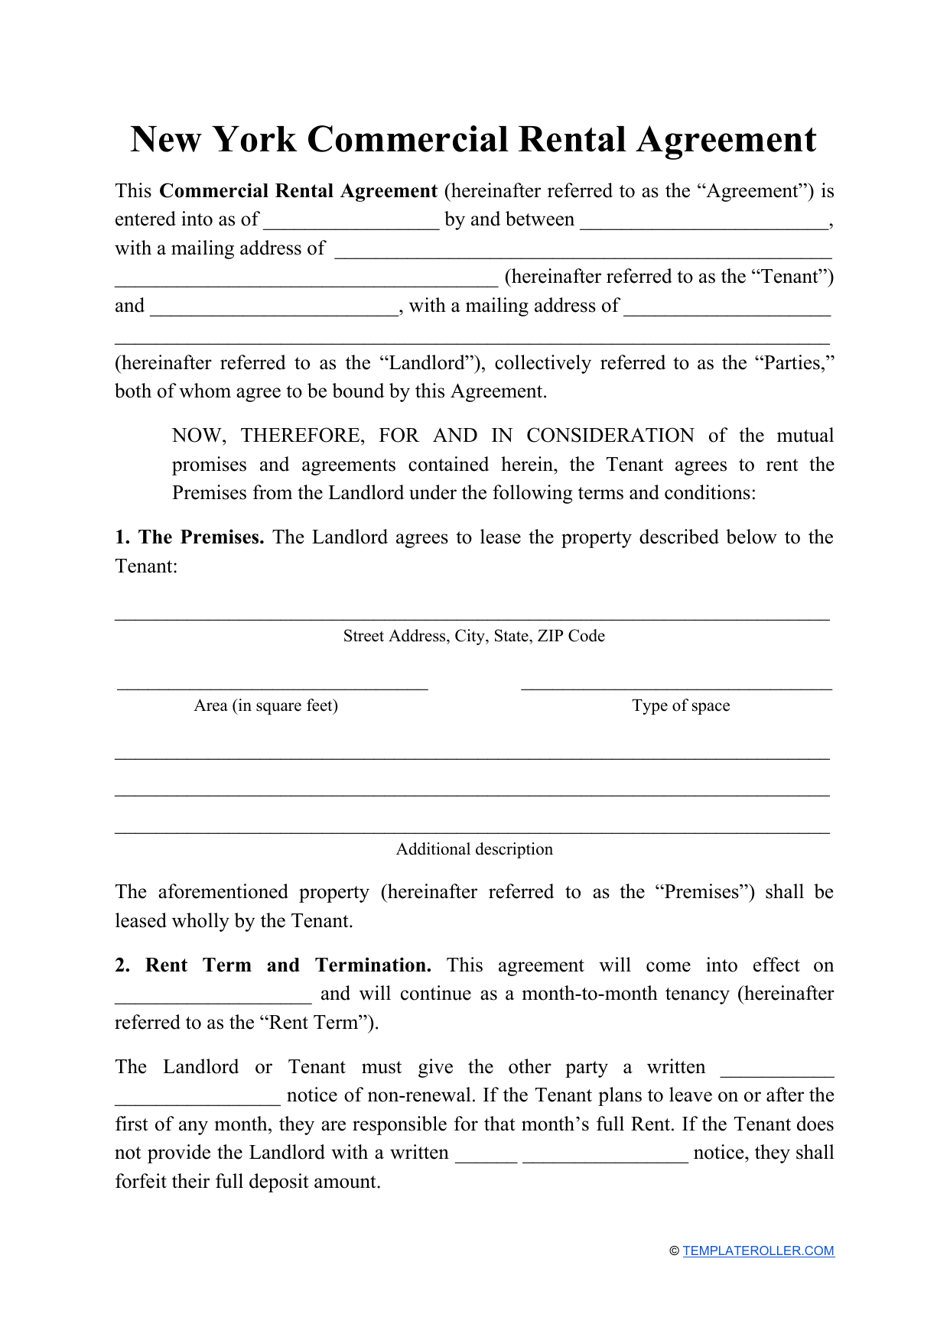 Commercial Rental Agreement Template - New York, Page 1